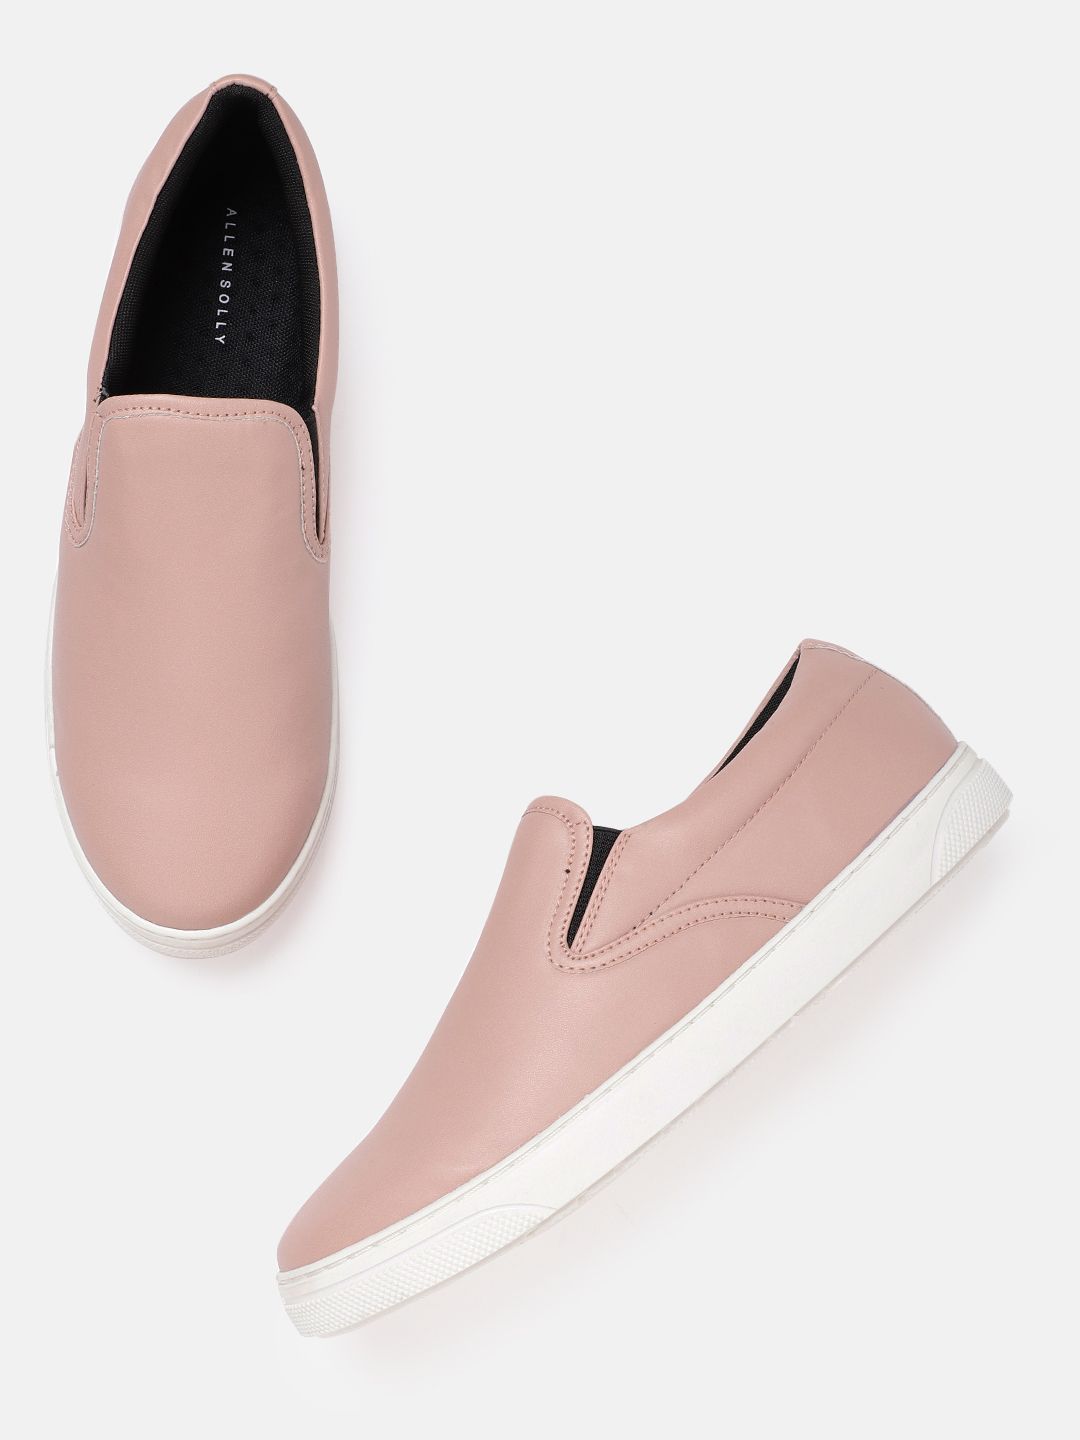 Allen Solly Women Peach-Coloured Solid Slip-On Sneakers Price in India